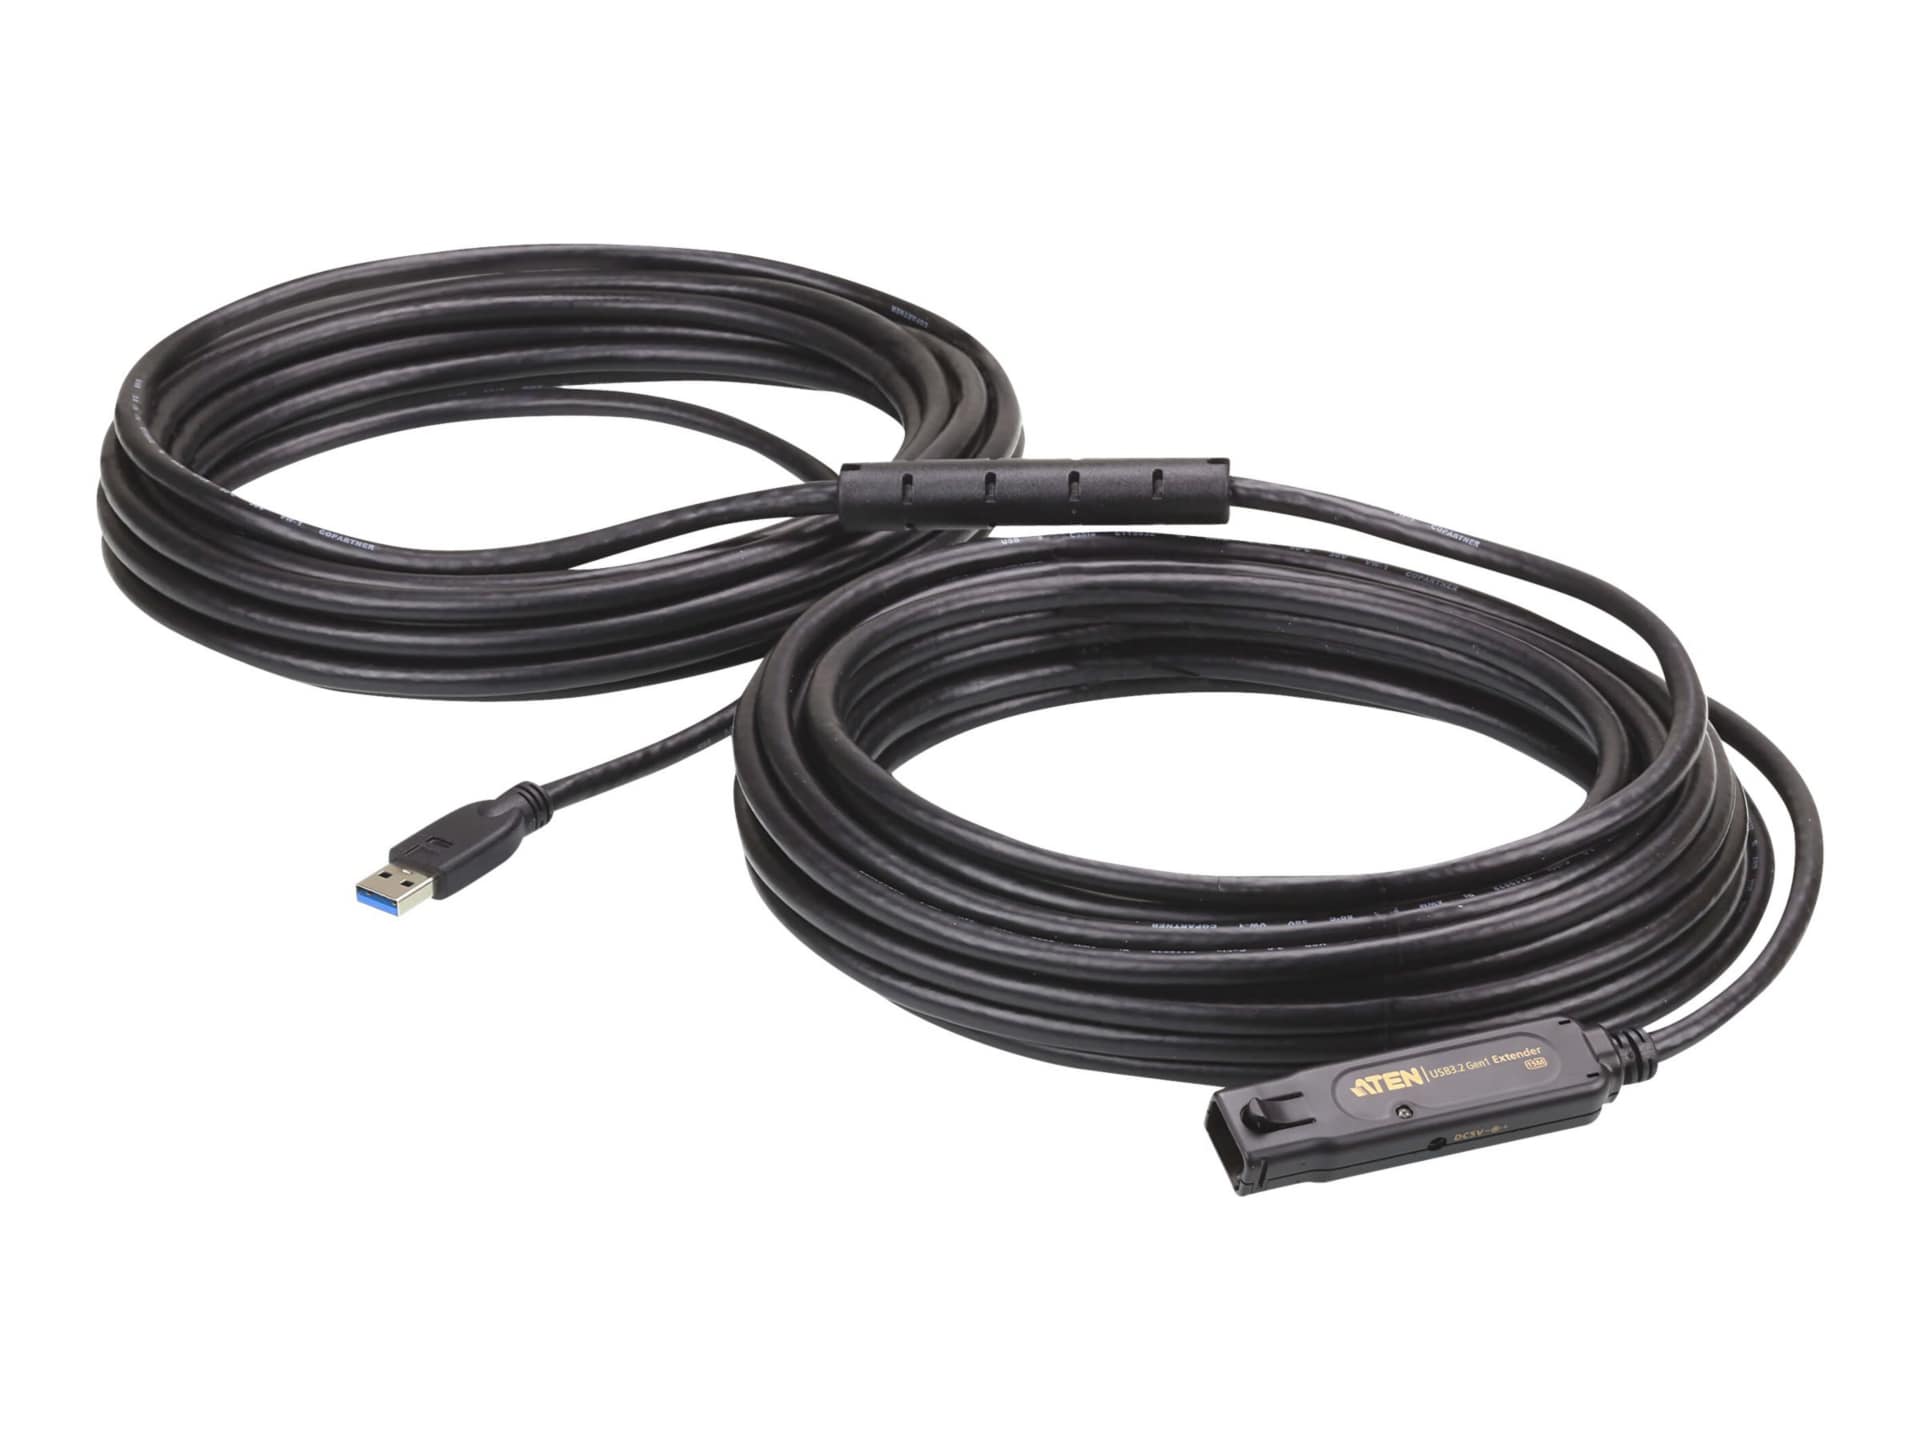 ATEN UE3315A - USB extension cable - USB Type A to USB Type A - 49 ft